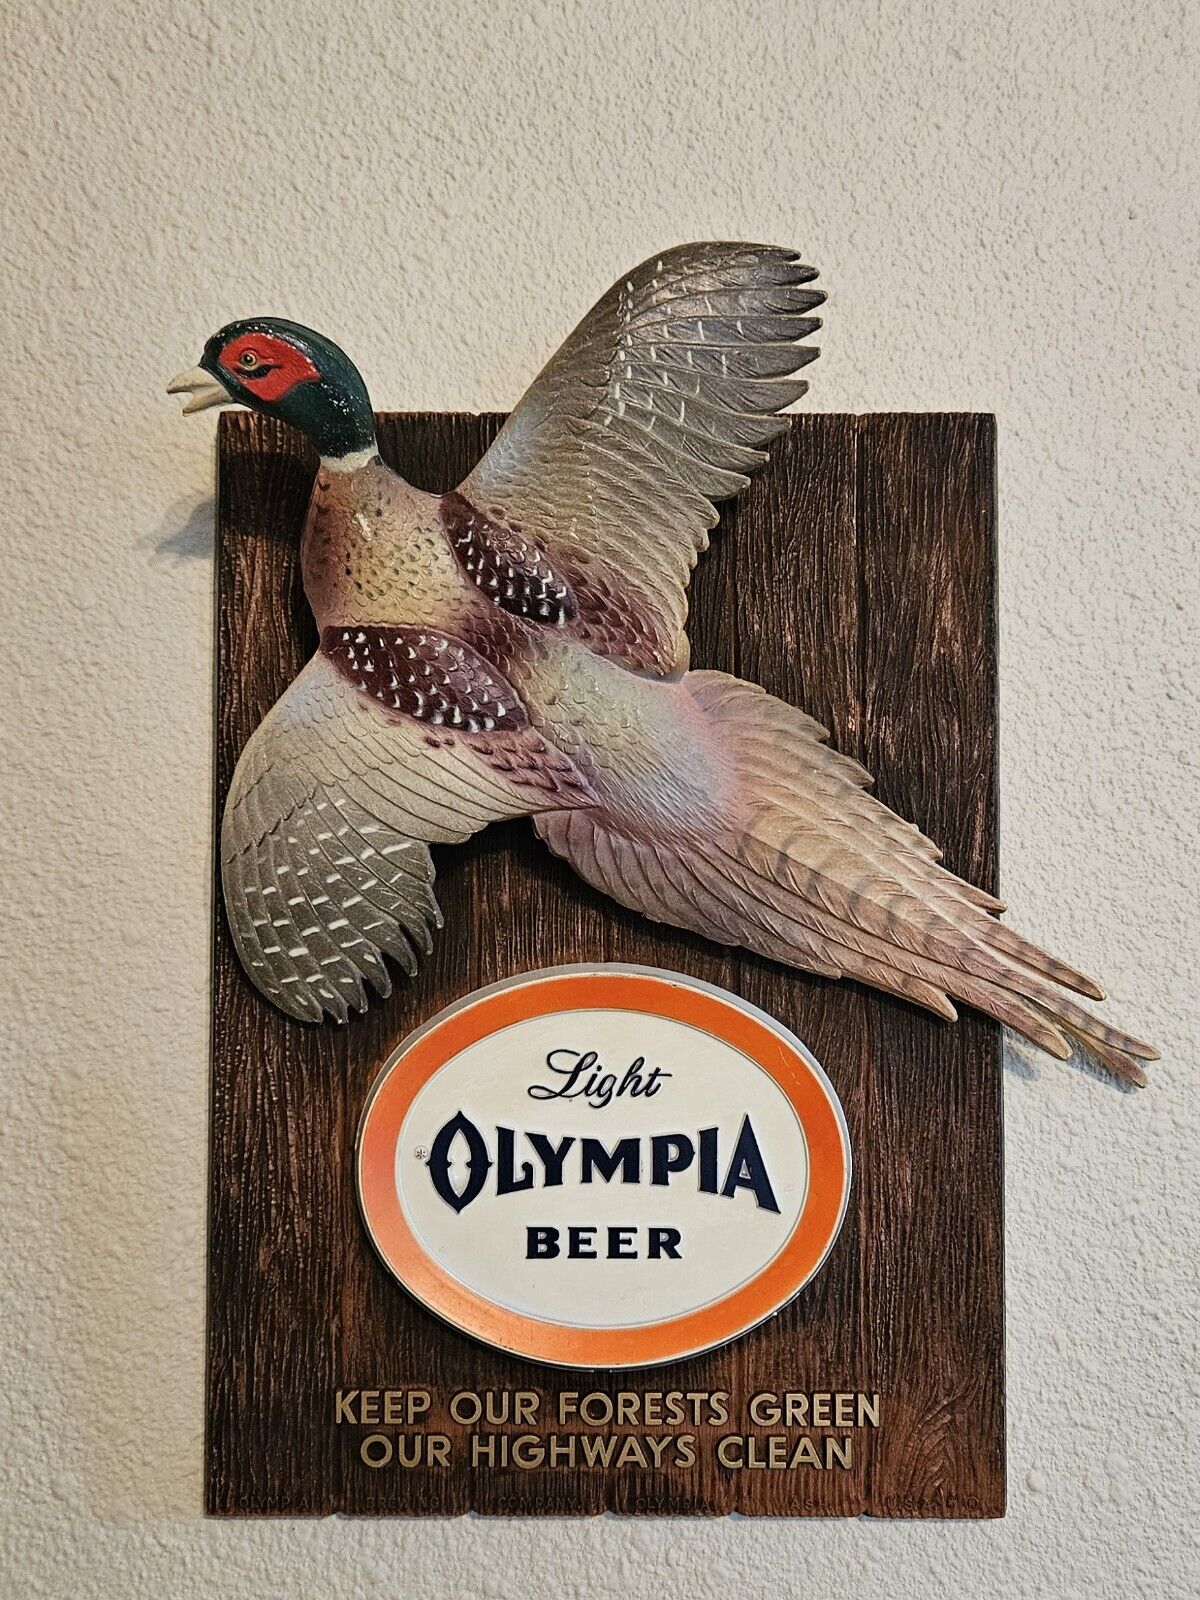 Vintage 1962 Olympia Light Beer Pheasant Wildlife Wall Bar Sign Plaque. Rare 